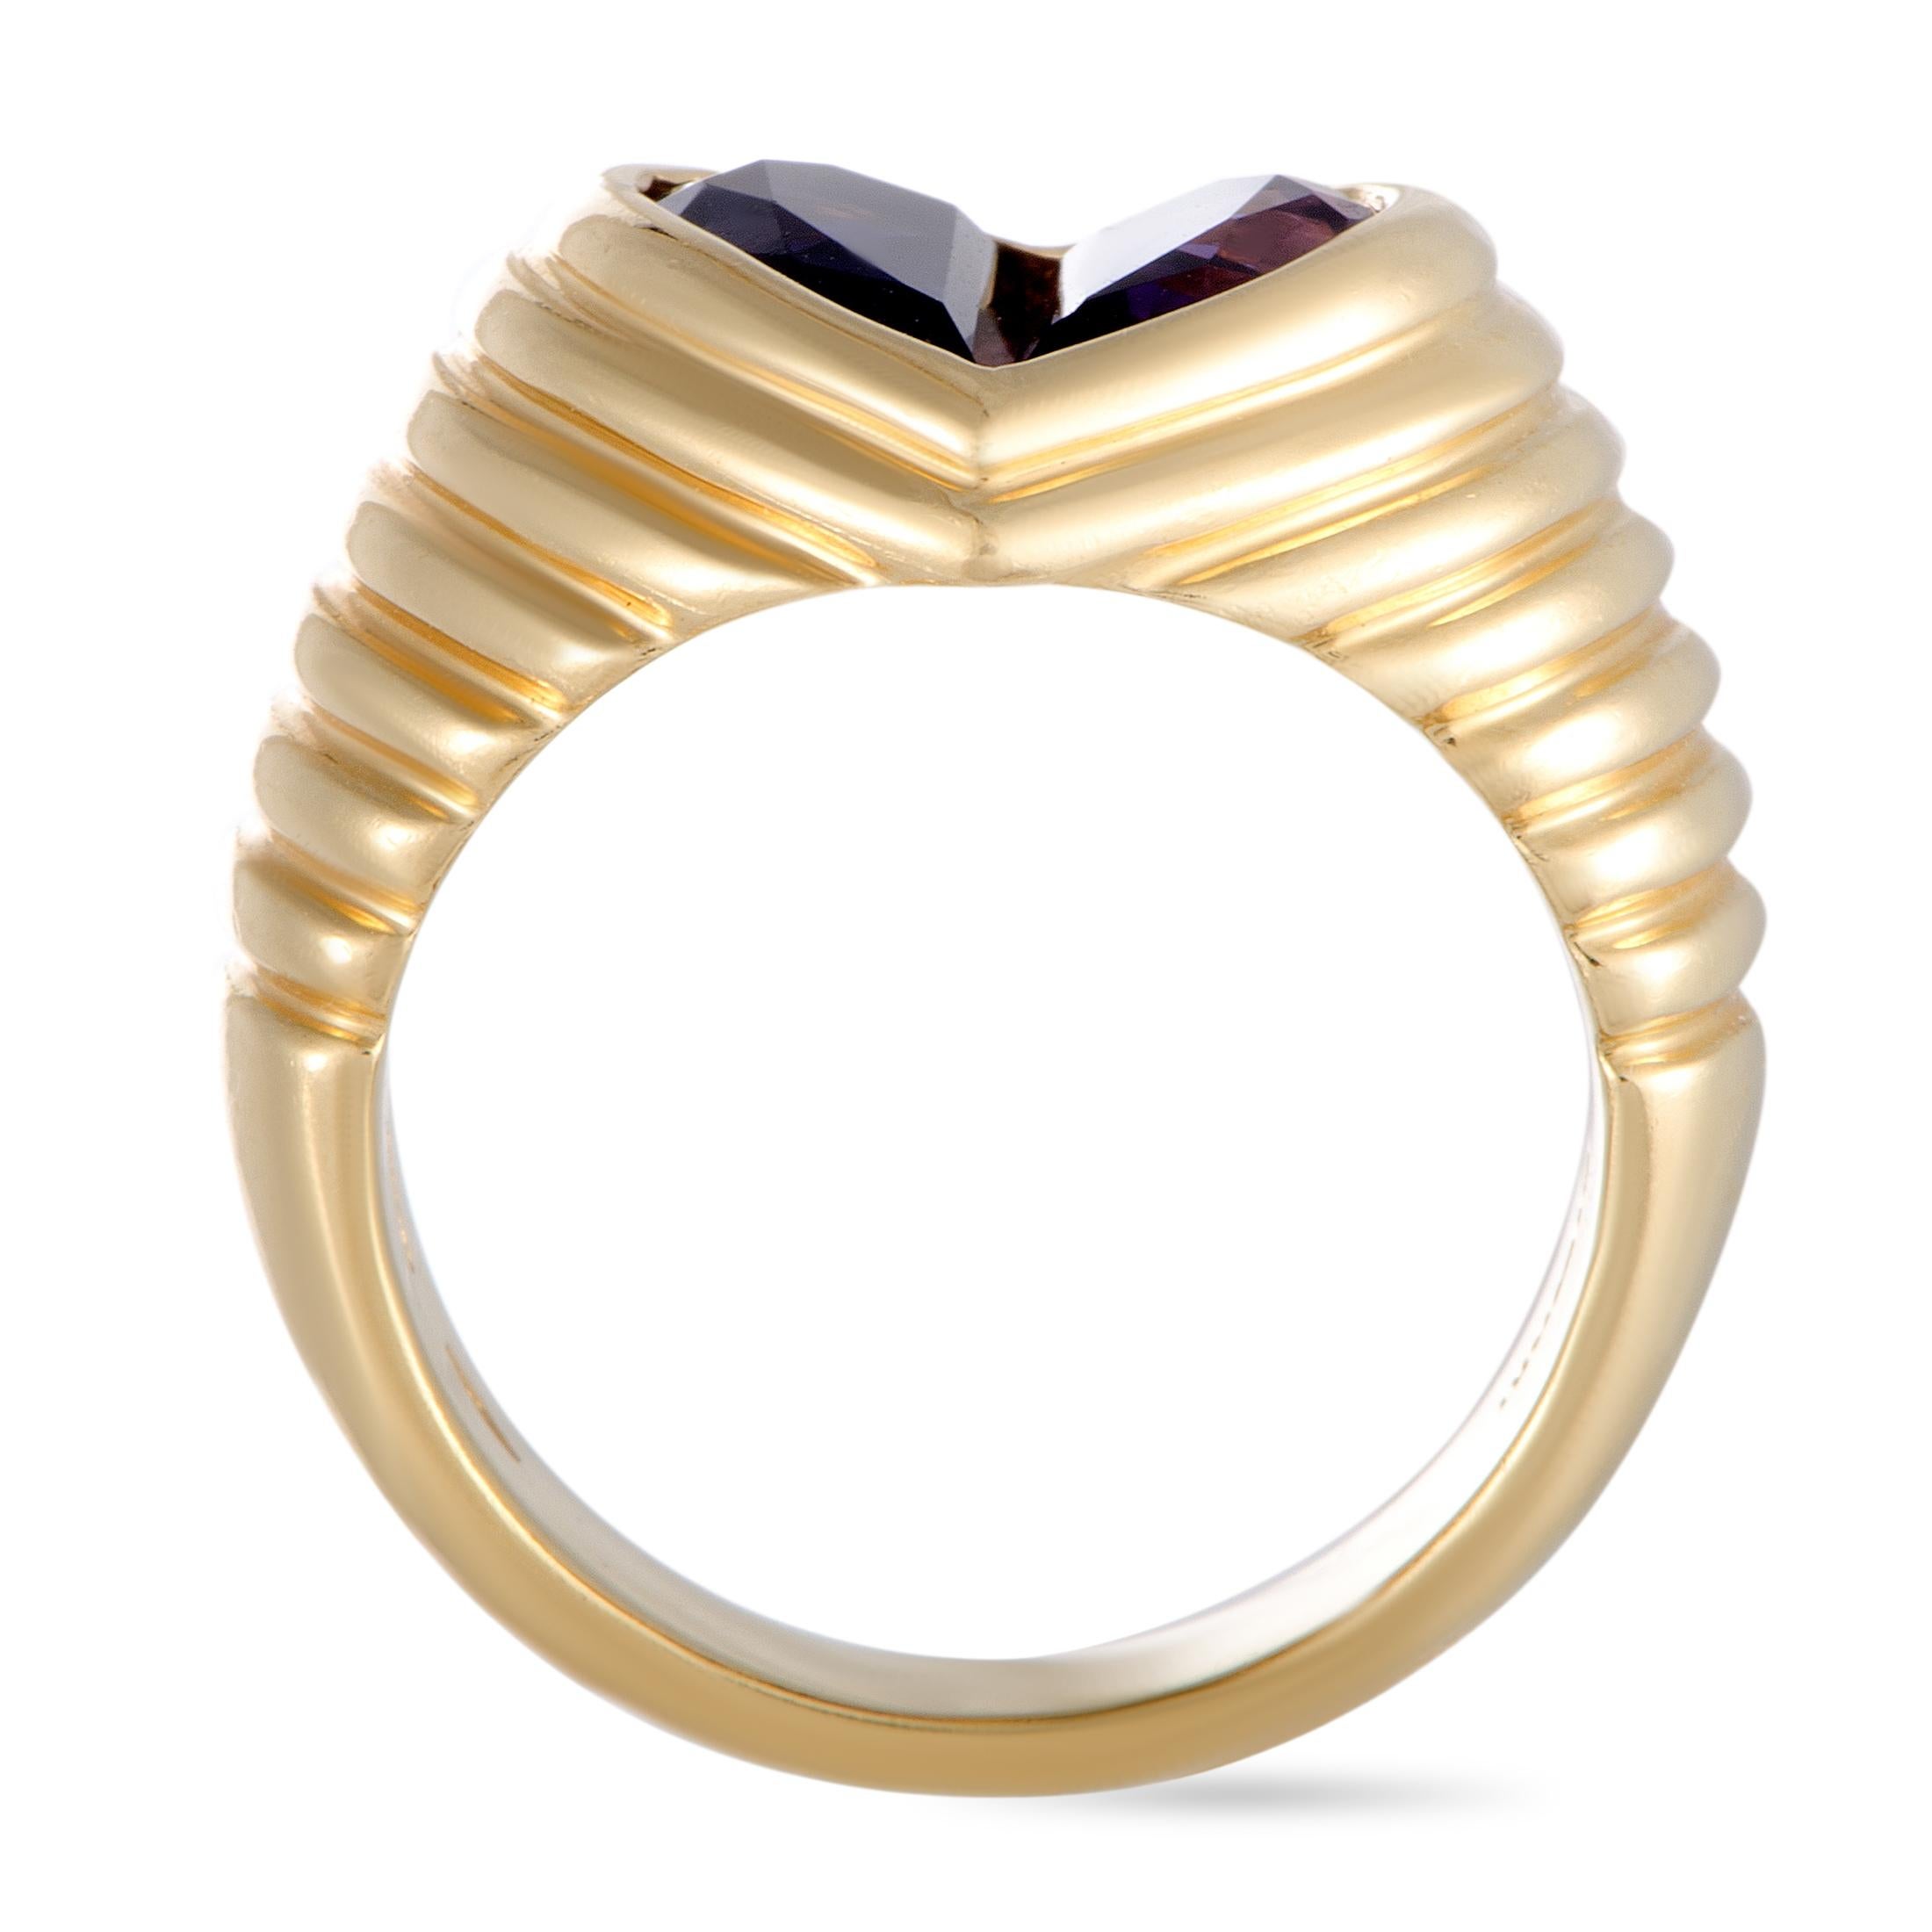 The Bvlgari “Doppio” ring is made of 18K yellow gold and set with an amethyst and an iolite. The ring weighs 10.9 grams, boasting band thickness of 5 mm and top height of 3 mm, while top dimensions measure 10 by 10 mm.

This item is offered in